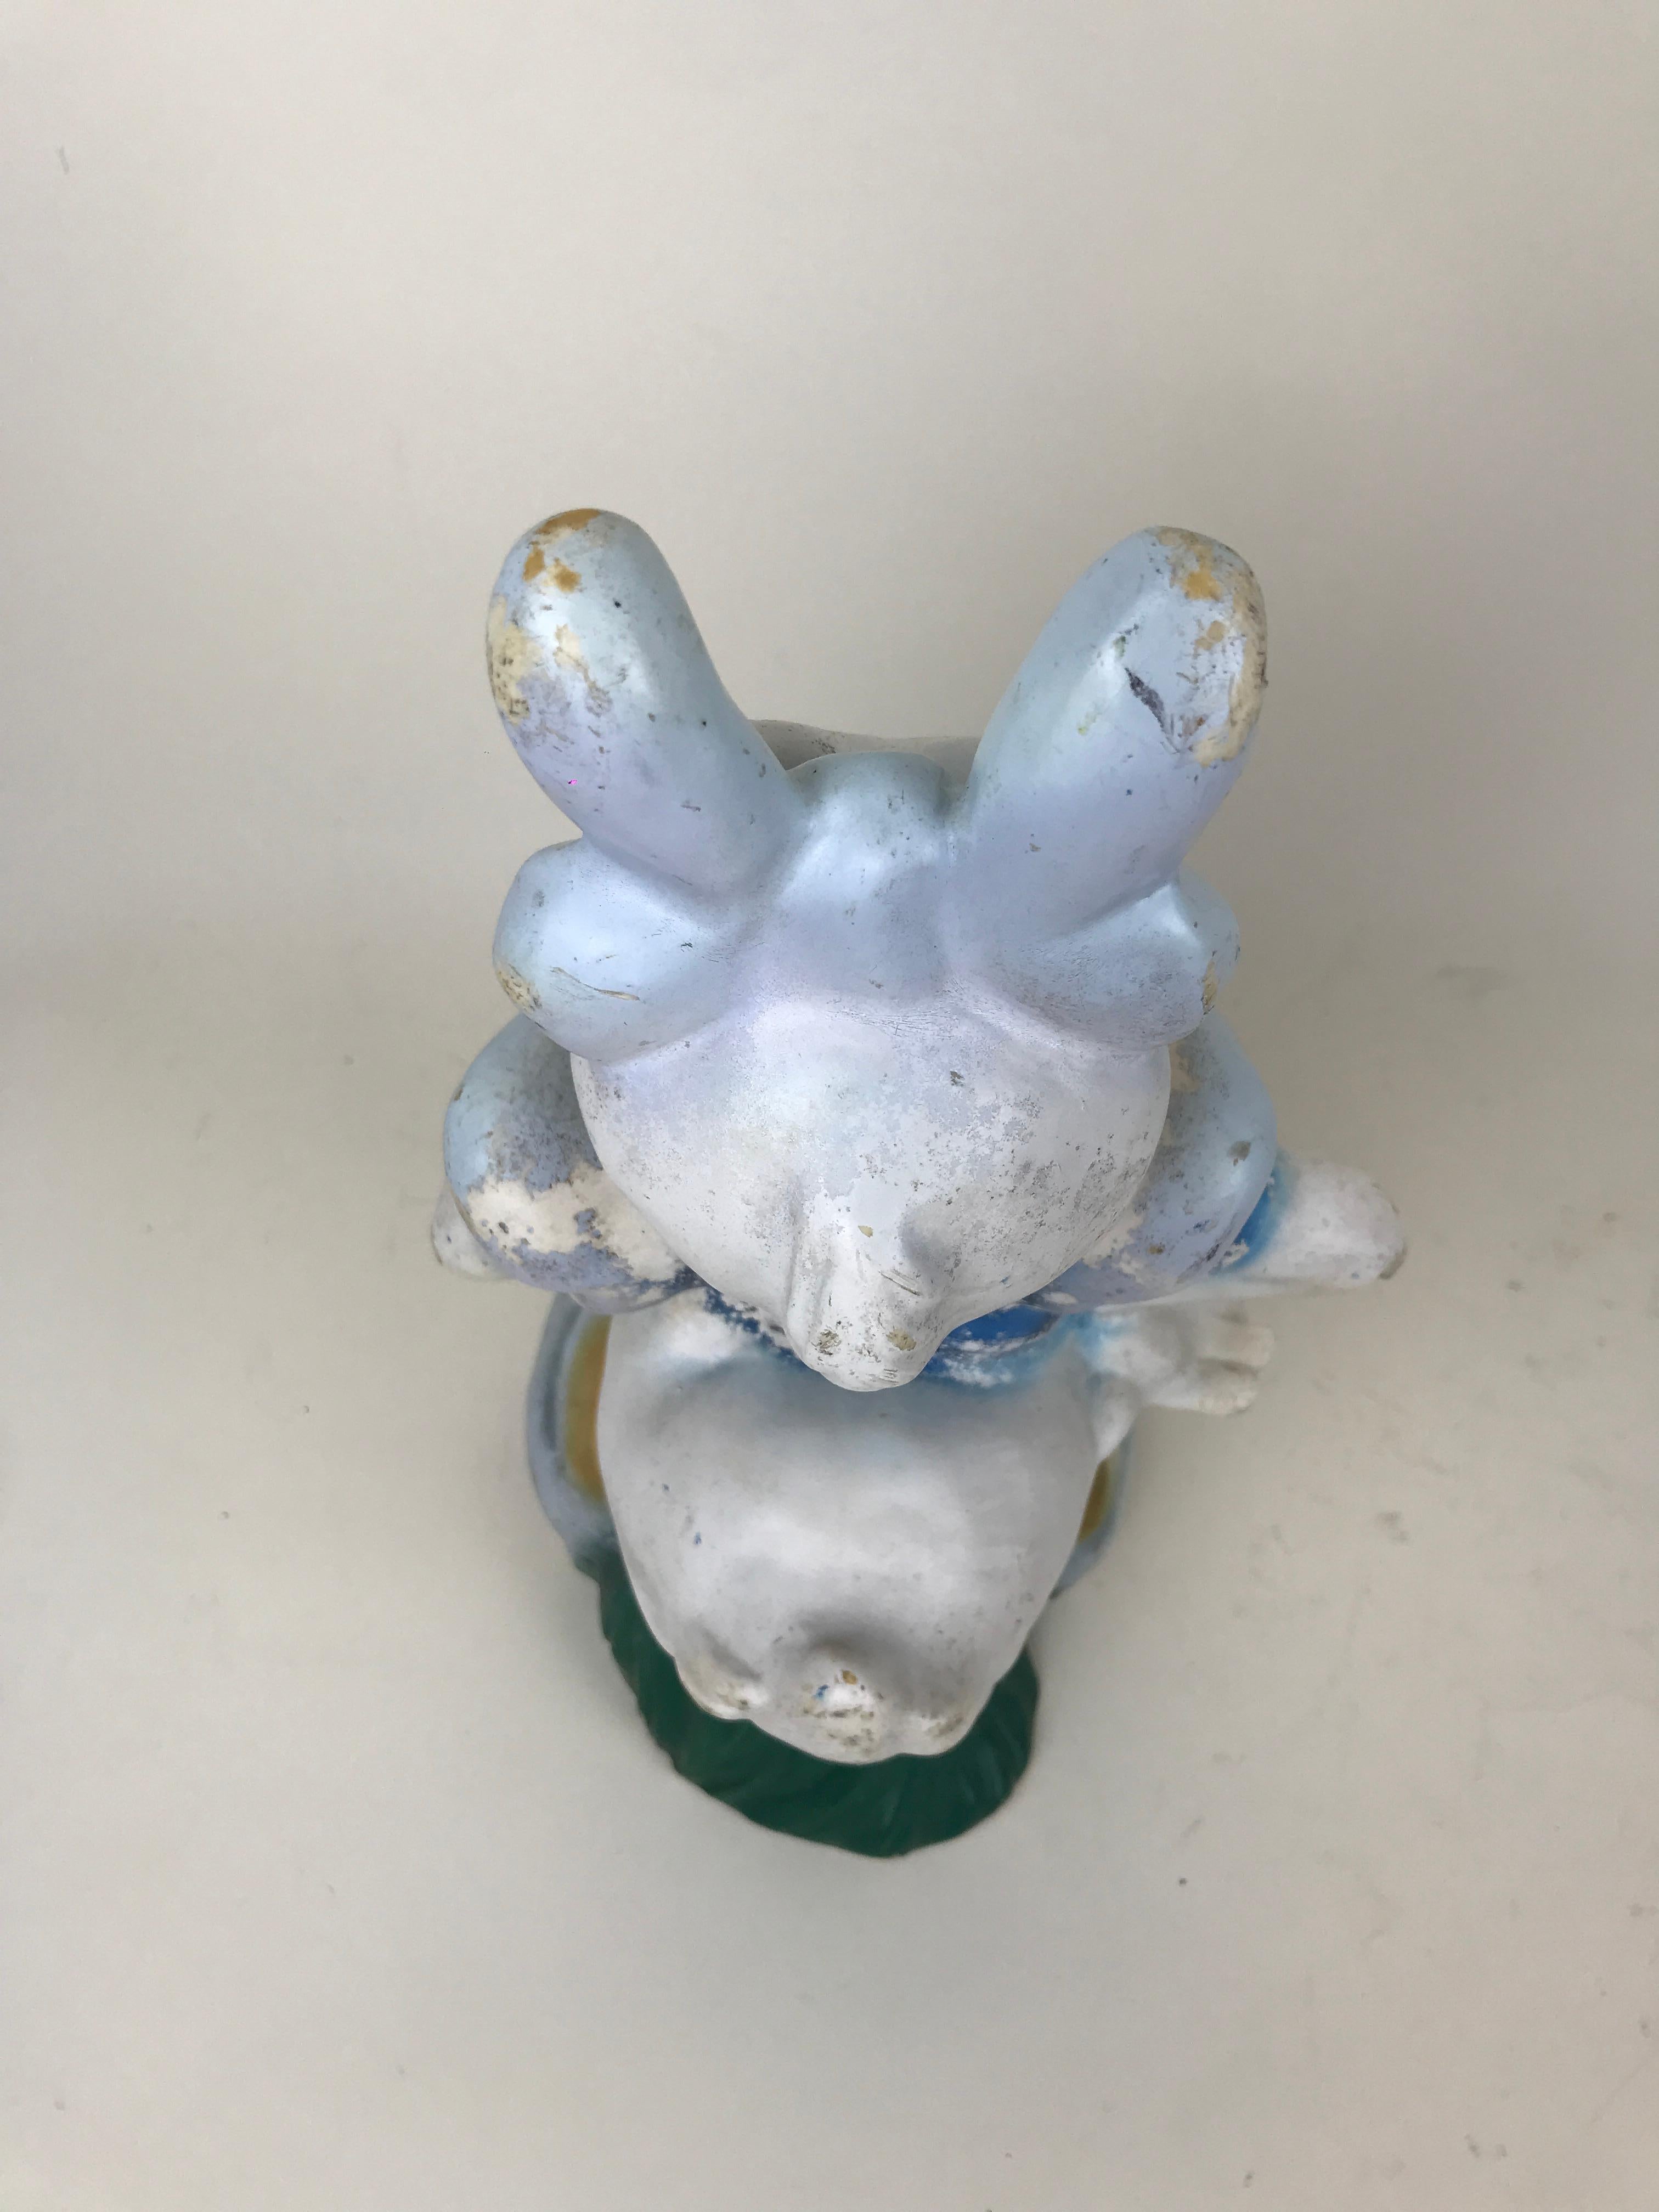 1990s Vintage Disney Daisy Duck Plastic Sculpture Made in Austria by Celloplast For Sale 1